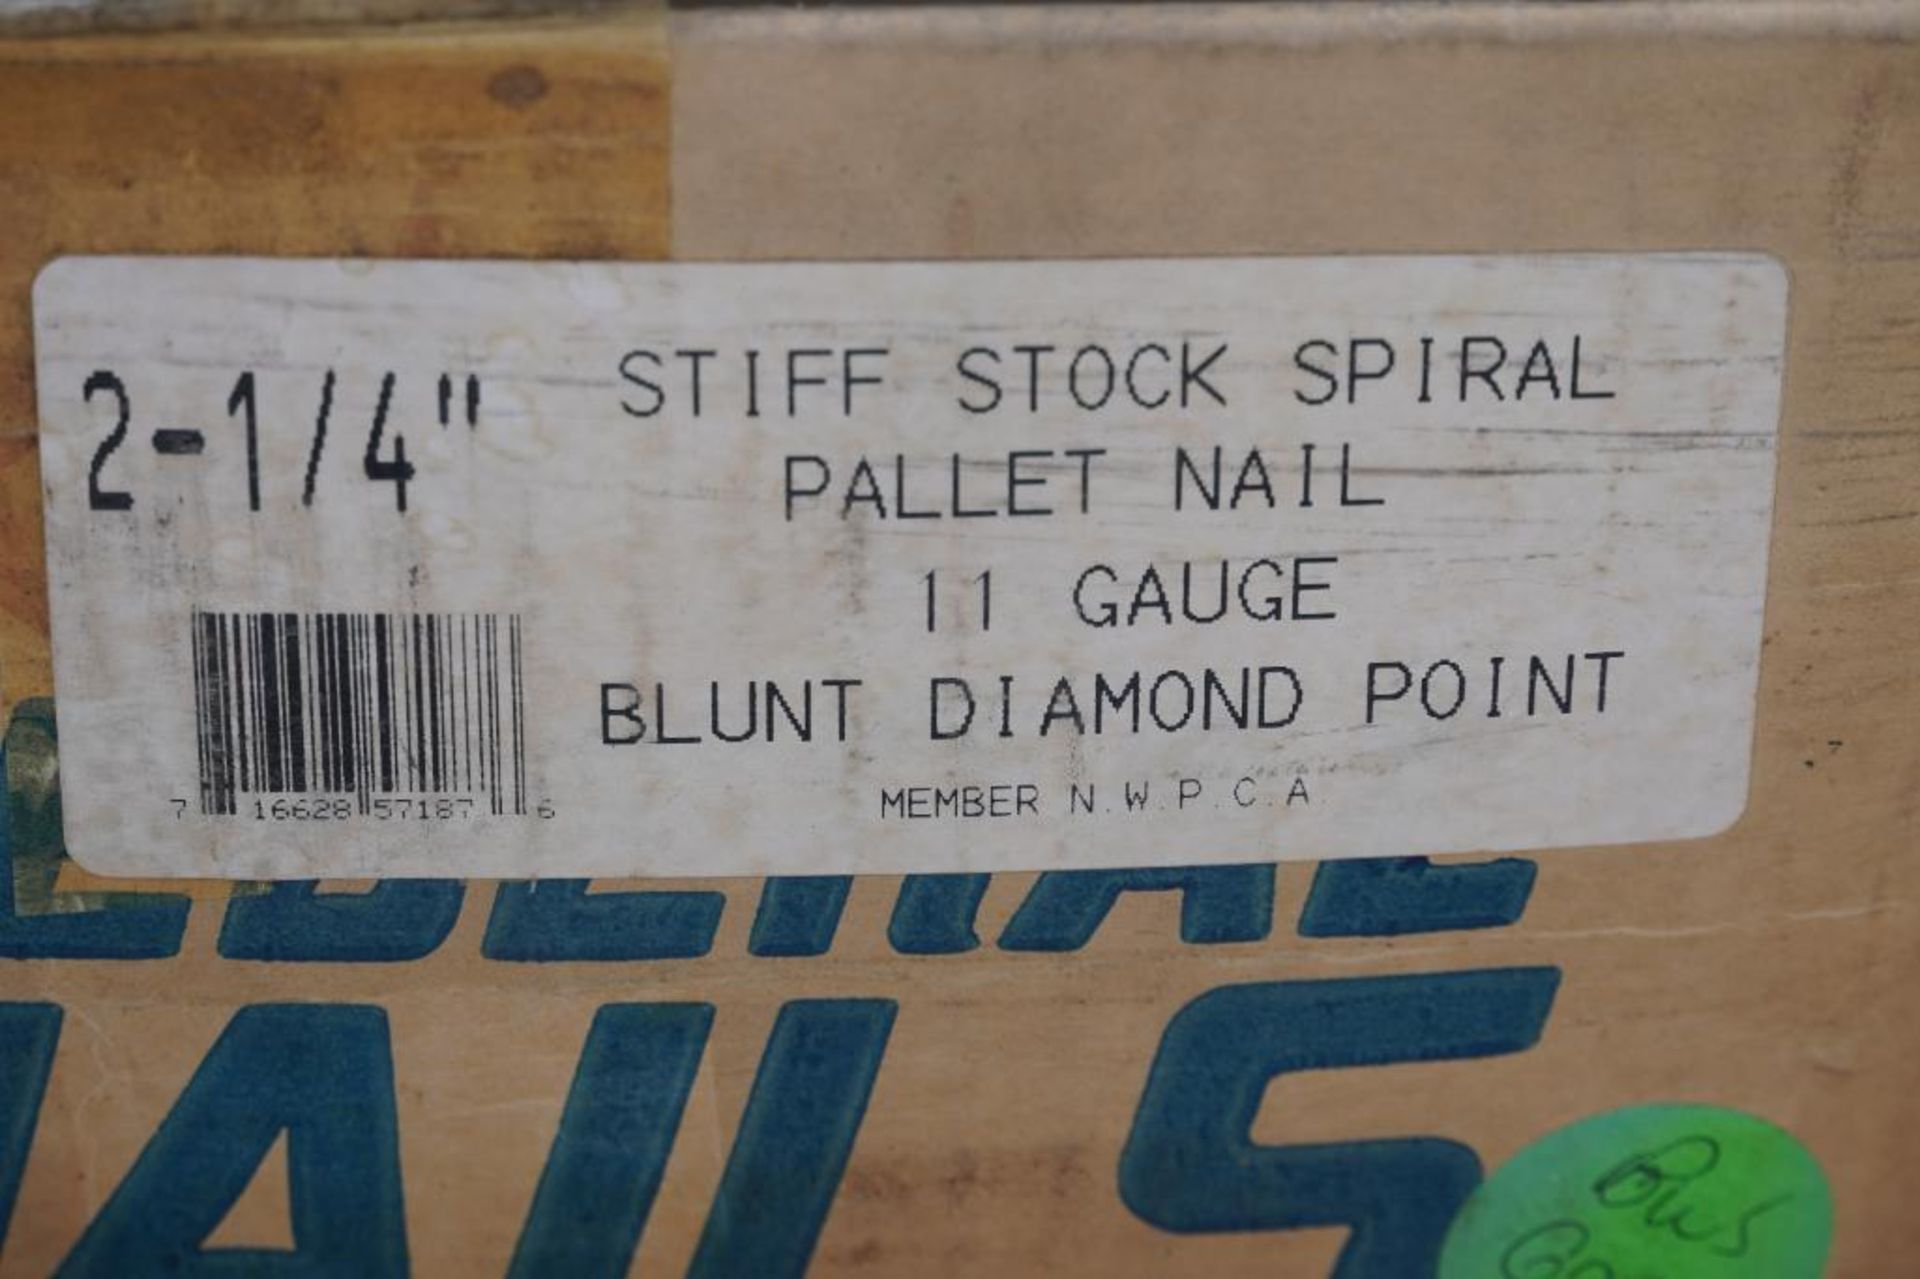 19, 50# Boxes of 2 1/4" Stiff Stock Spiral Pallet Nails, 11 Guage - Image 5 of 5